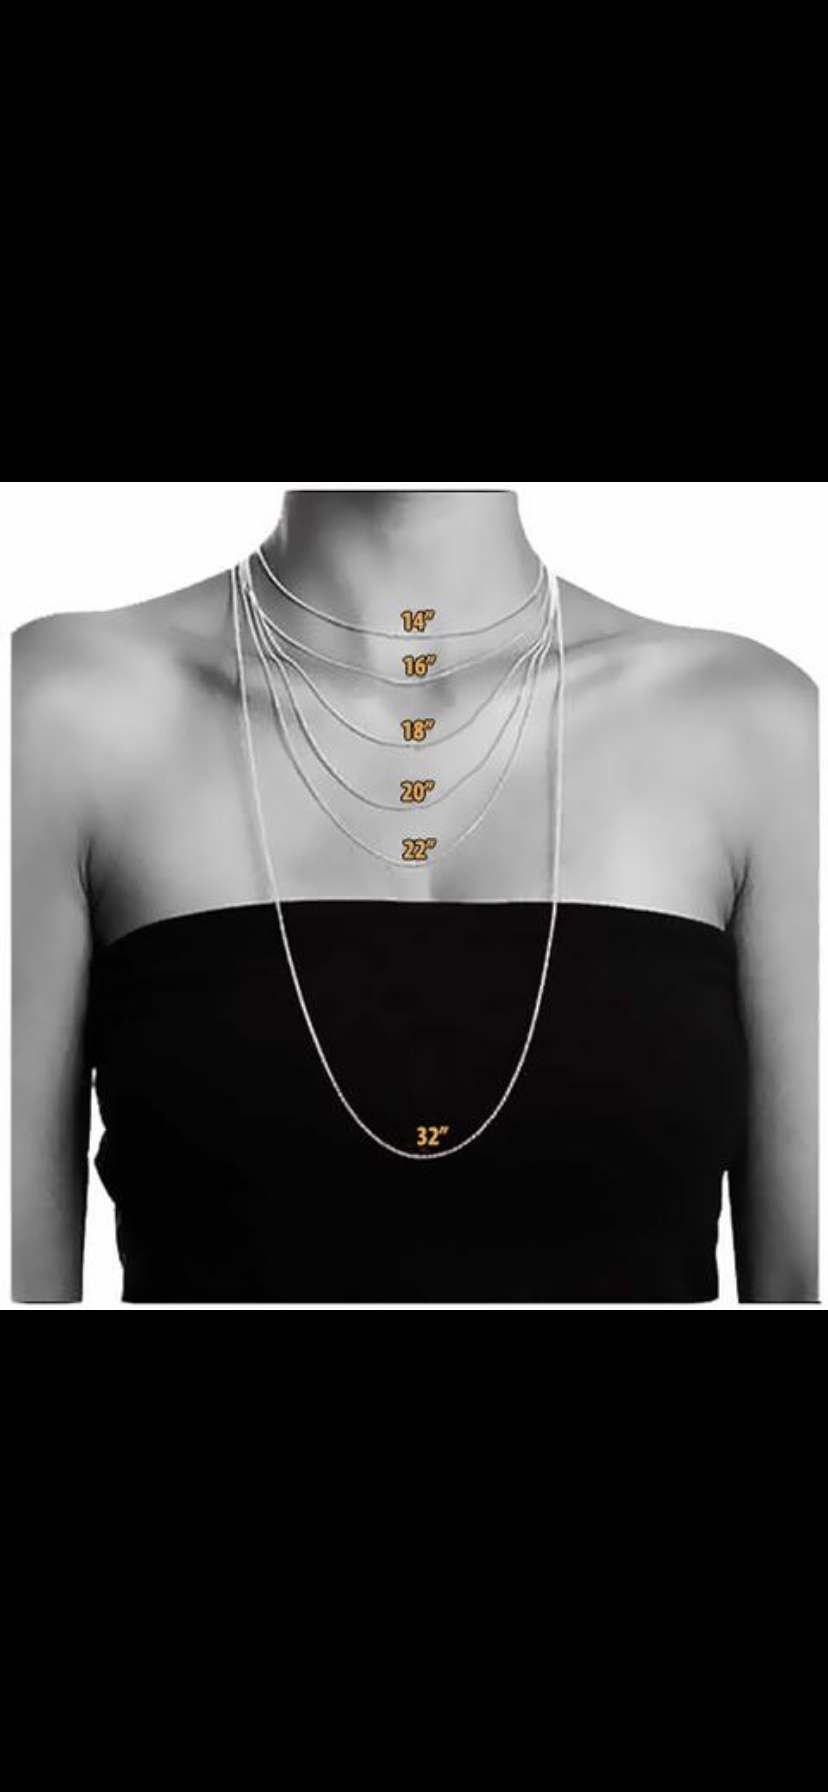 16" + 2" Gold Plated Mountain Range Necklace